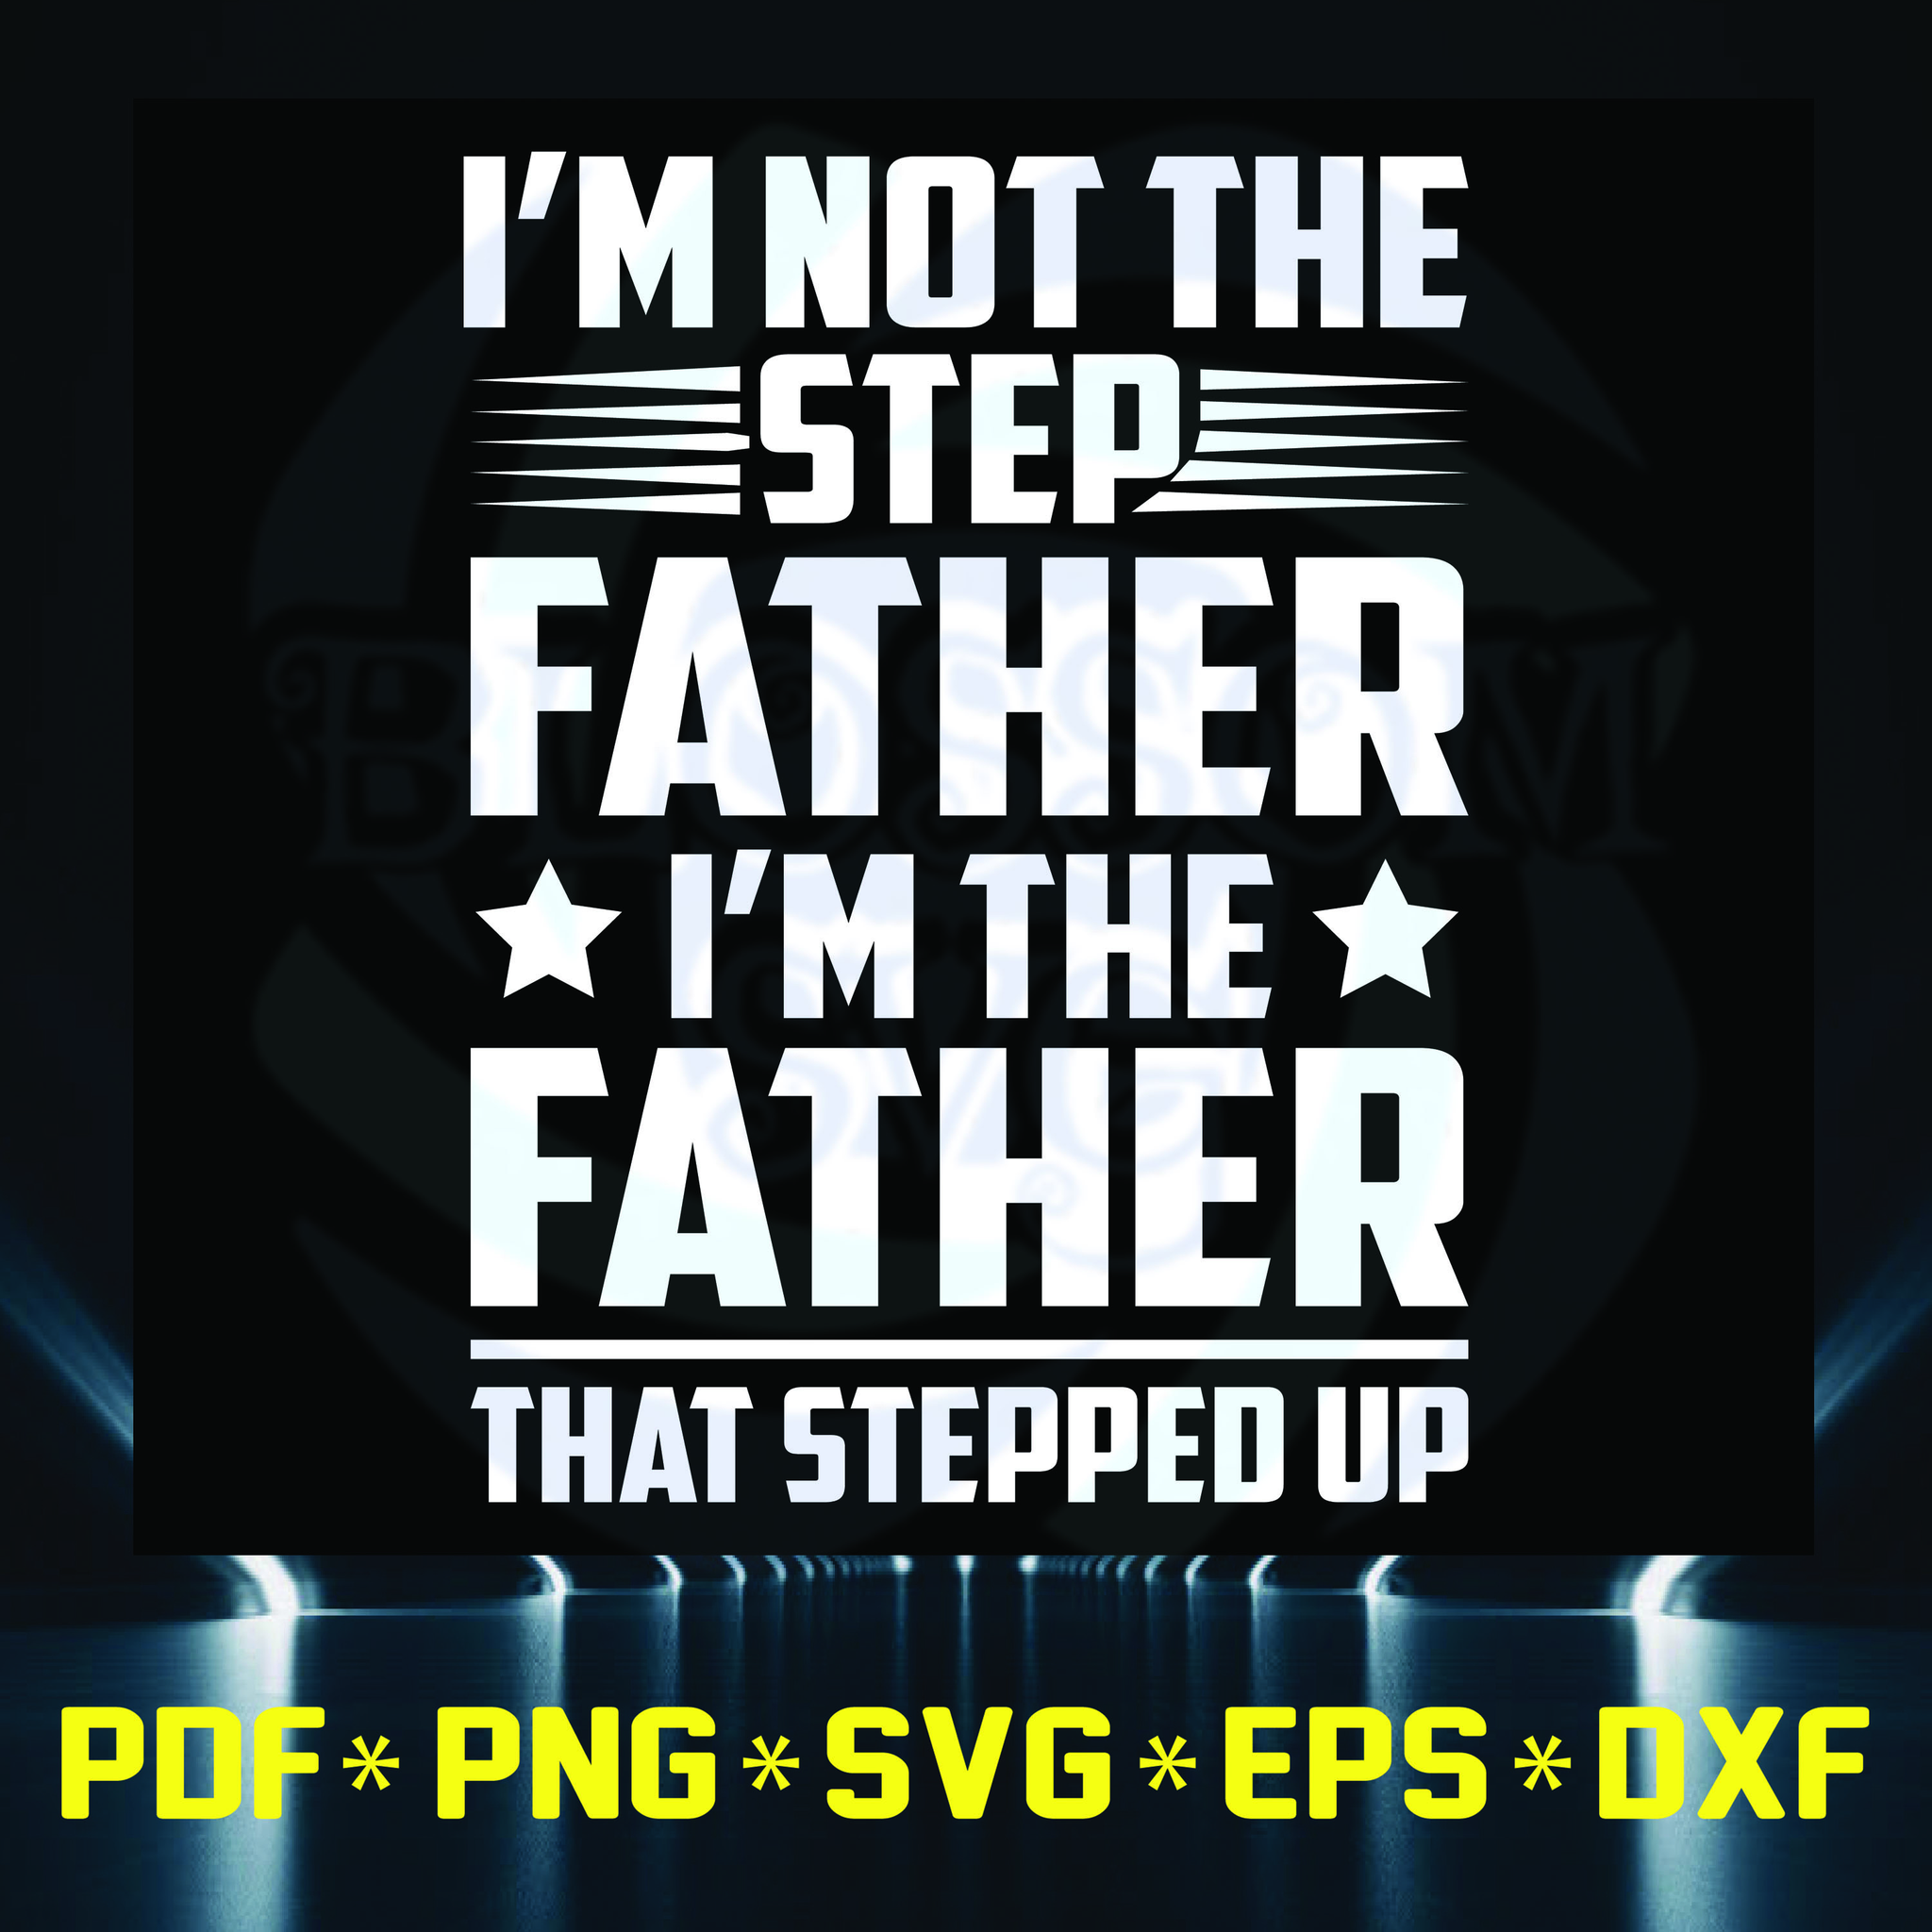 Download I'm Not The Step Father, I'm The Father, That Sptepped Up, Step-Father - Blossomsvg